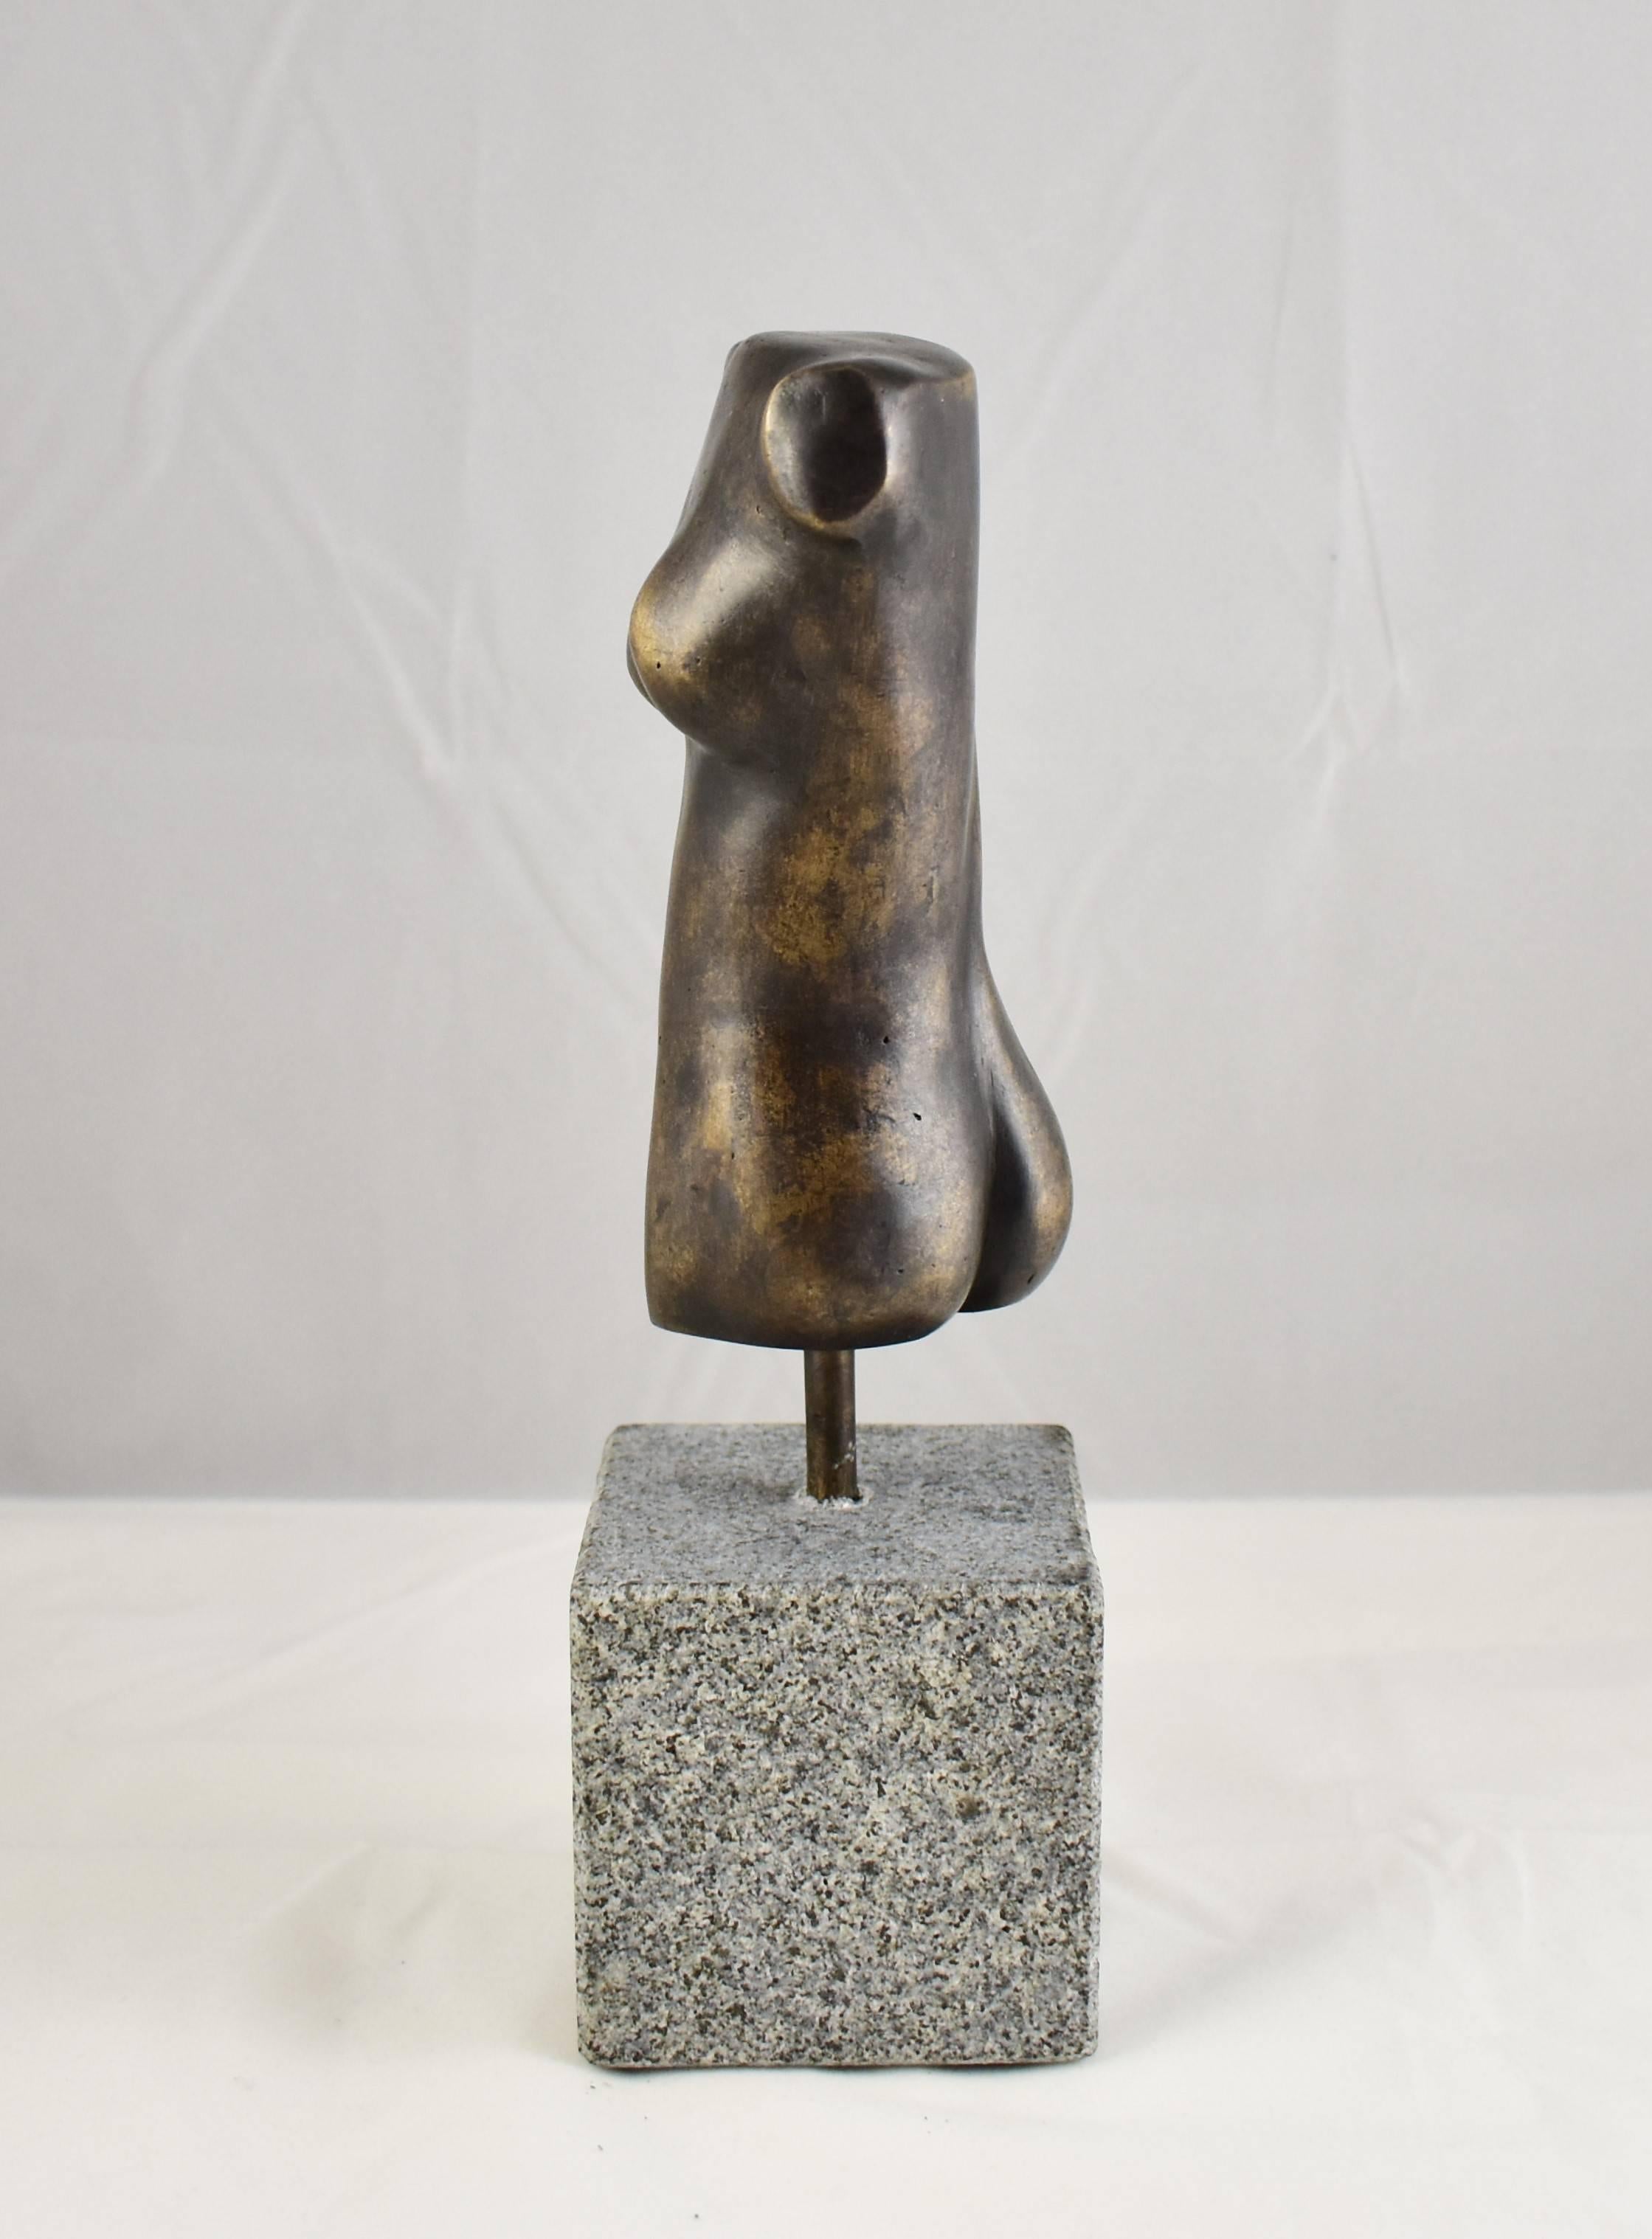 A modern bronze sculpture of a female form/torso with a Burnished Brown Gold Patina finish. Hand made by the artist then hand cast. Modernistic and artistic design capturing the essence of the female form with graceful lines, beautiful from every